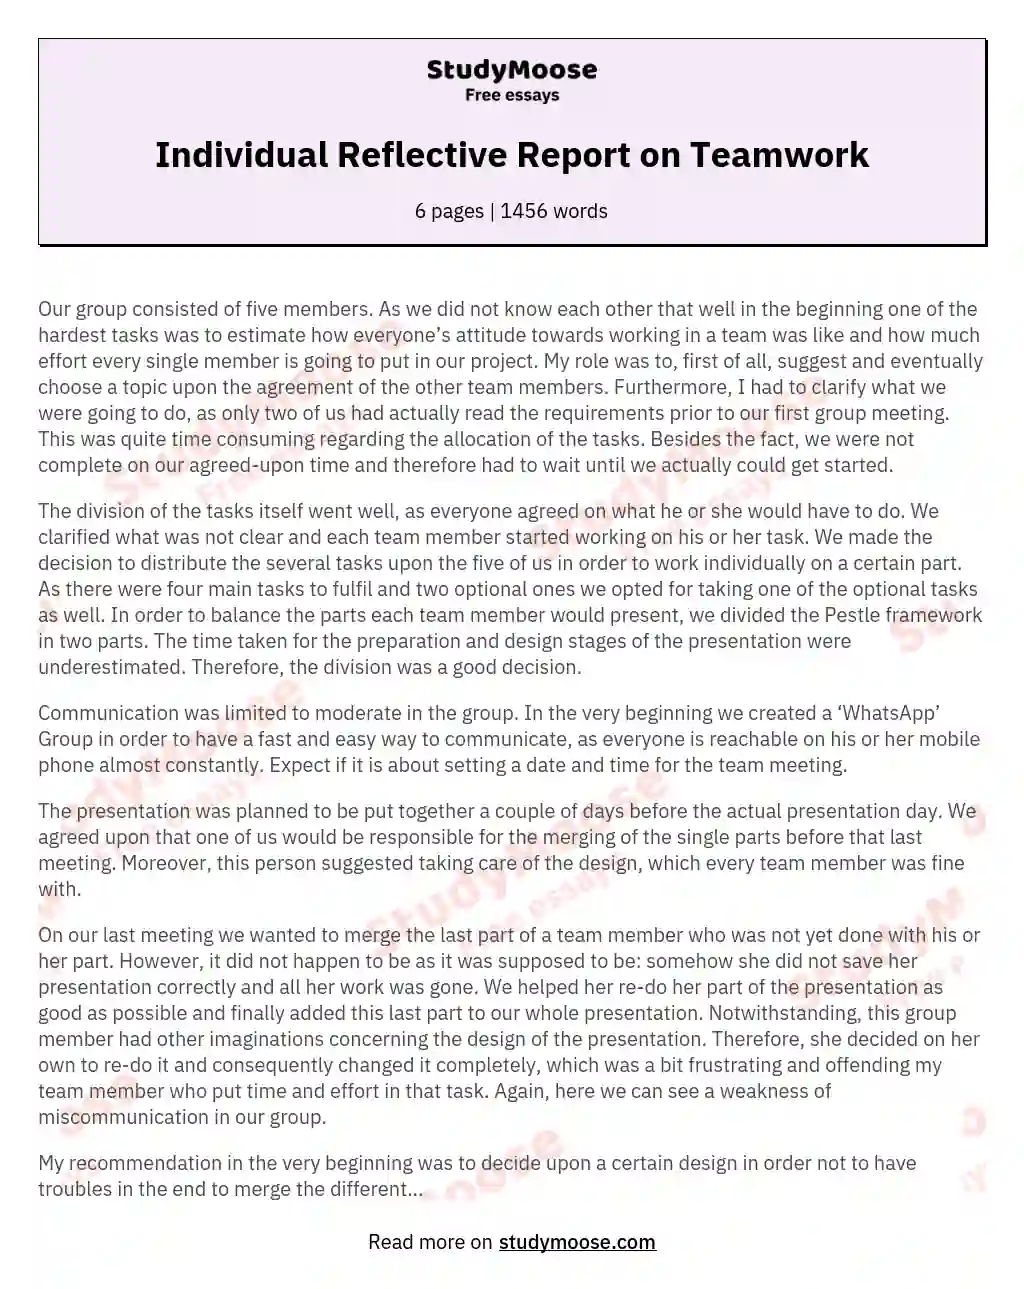 reflective writing examples on group work